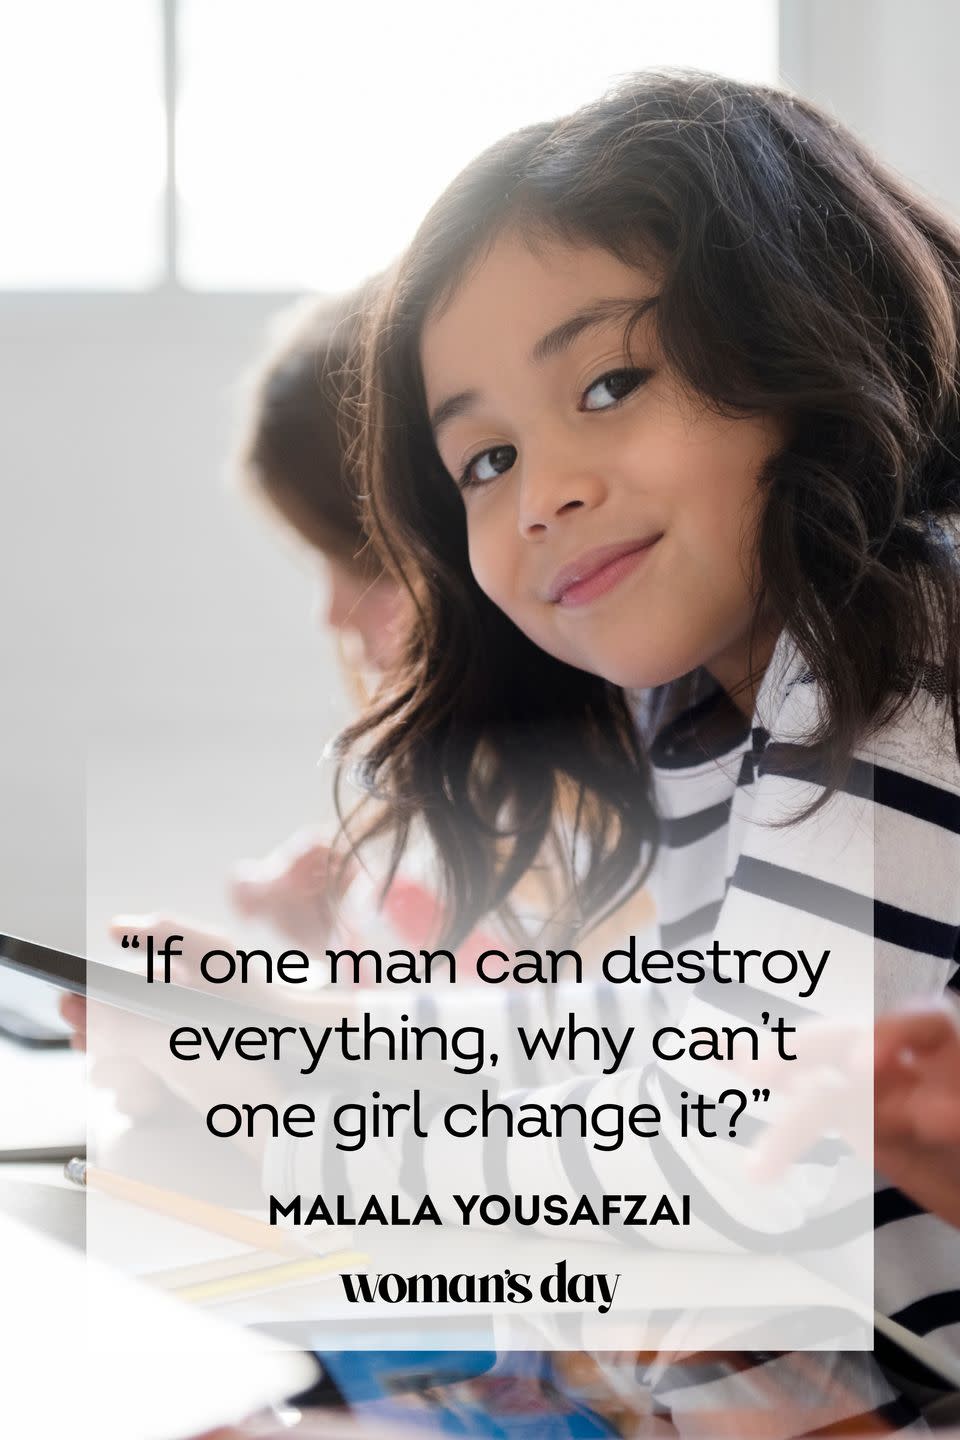 <p>“If one man can destroy everything, why can’t one girl change it?”</p>